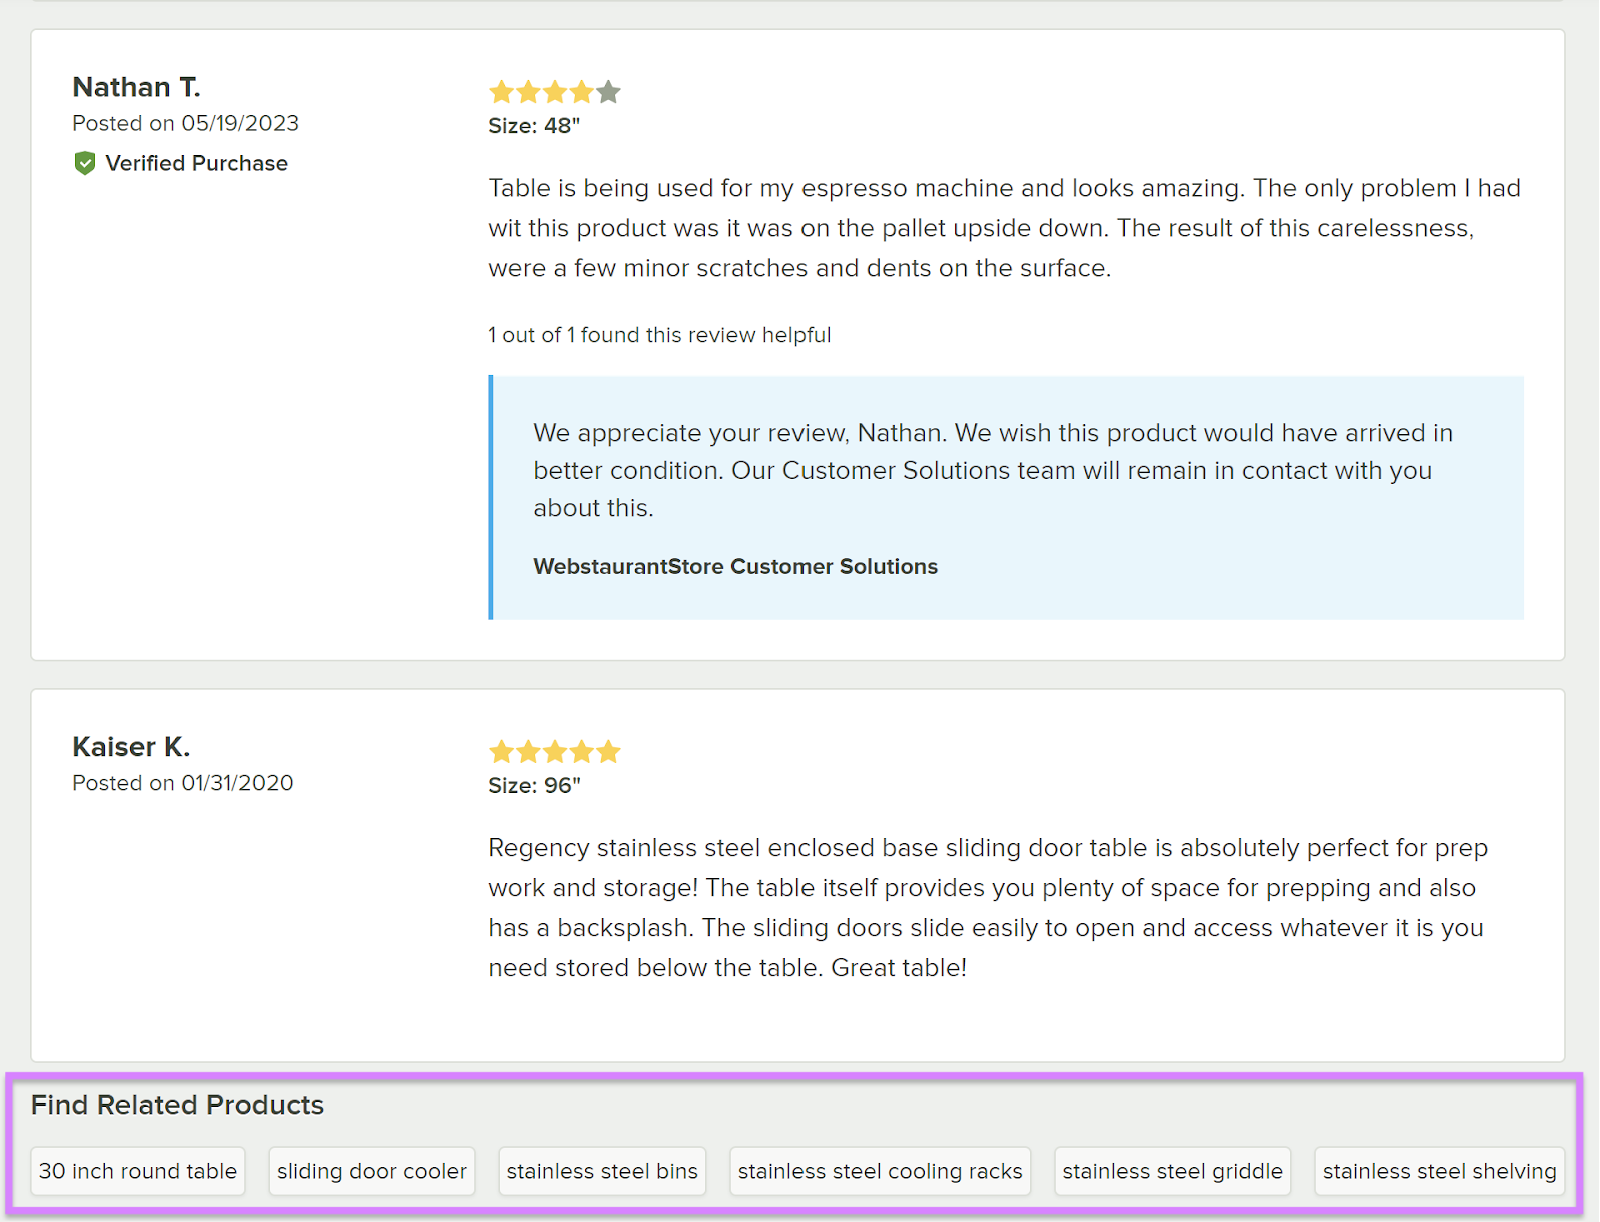 Customer reviews and recommendations for related products featured connected  WebstaurantStore's site